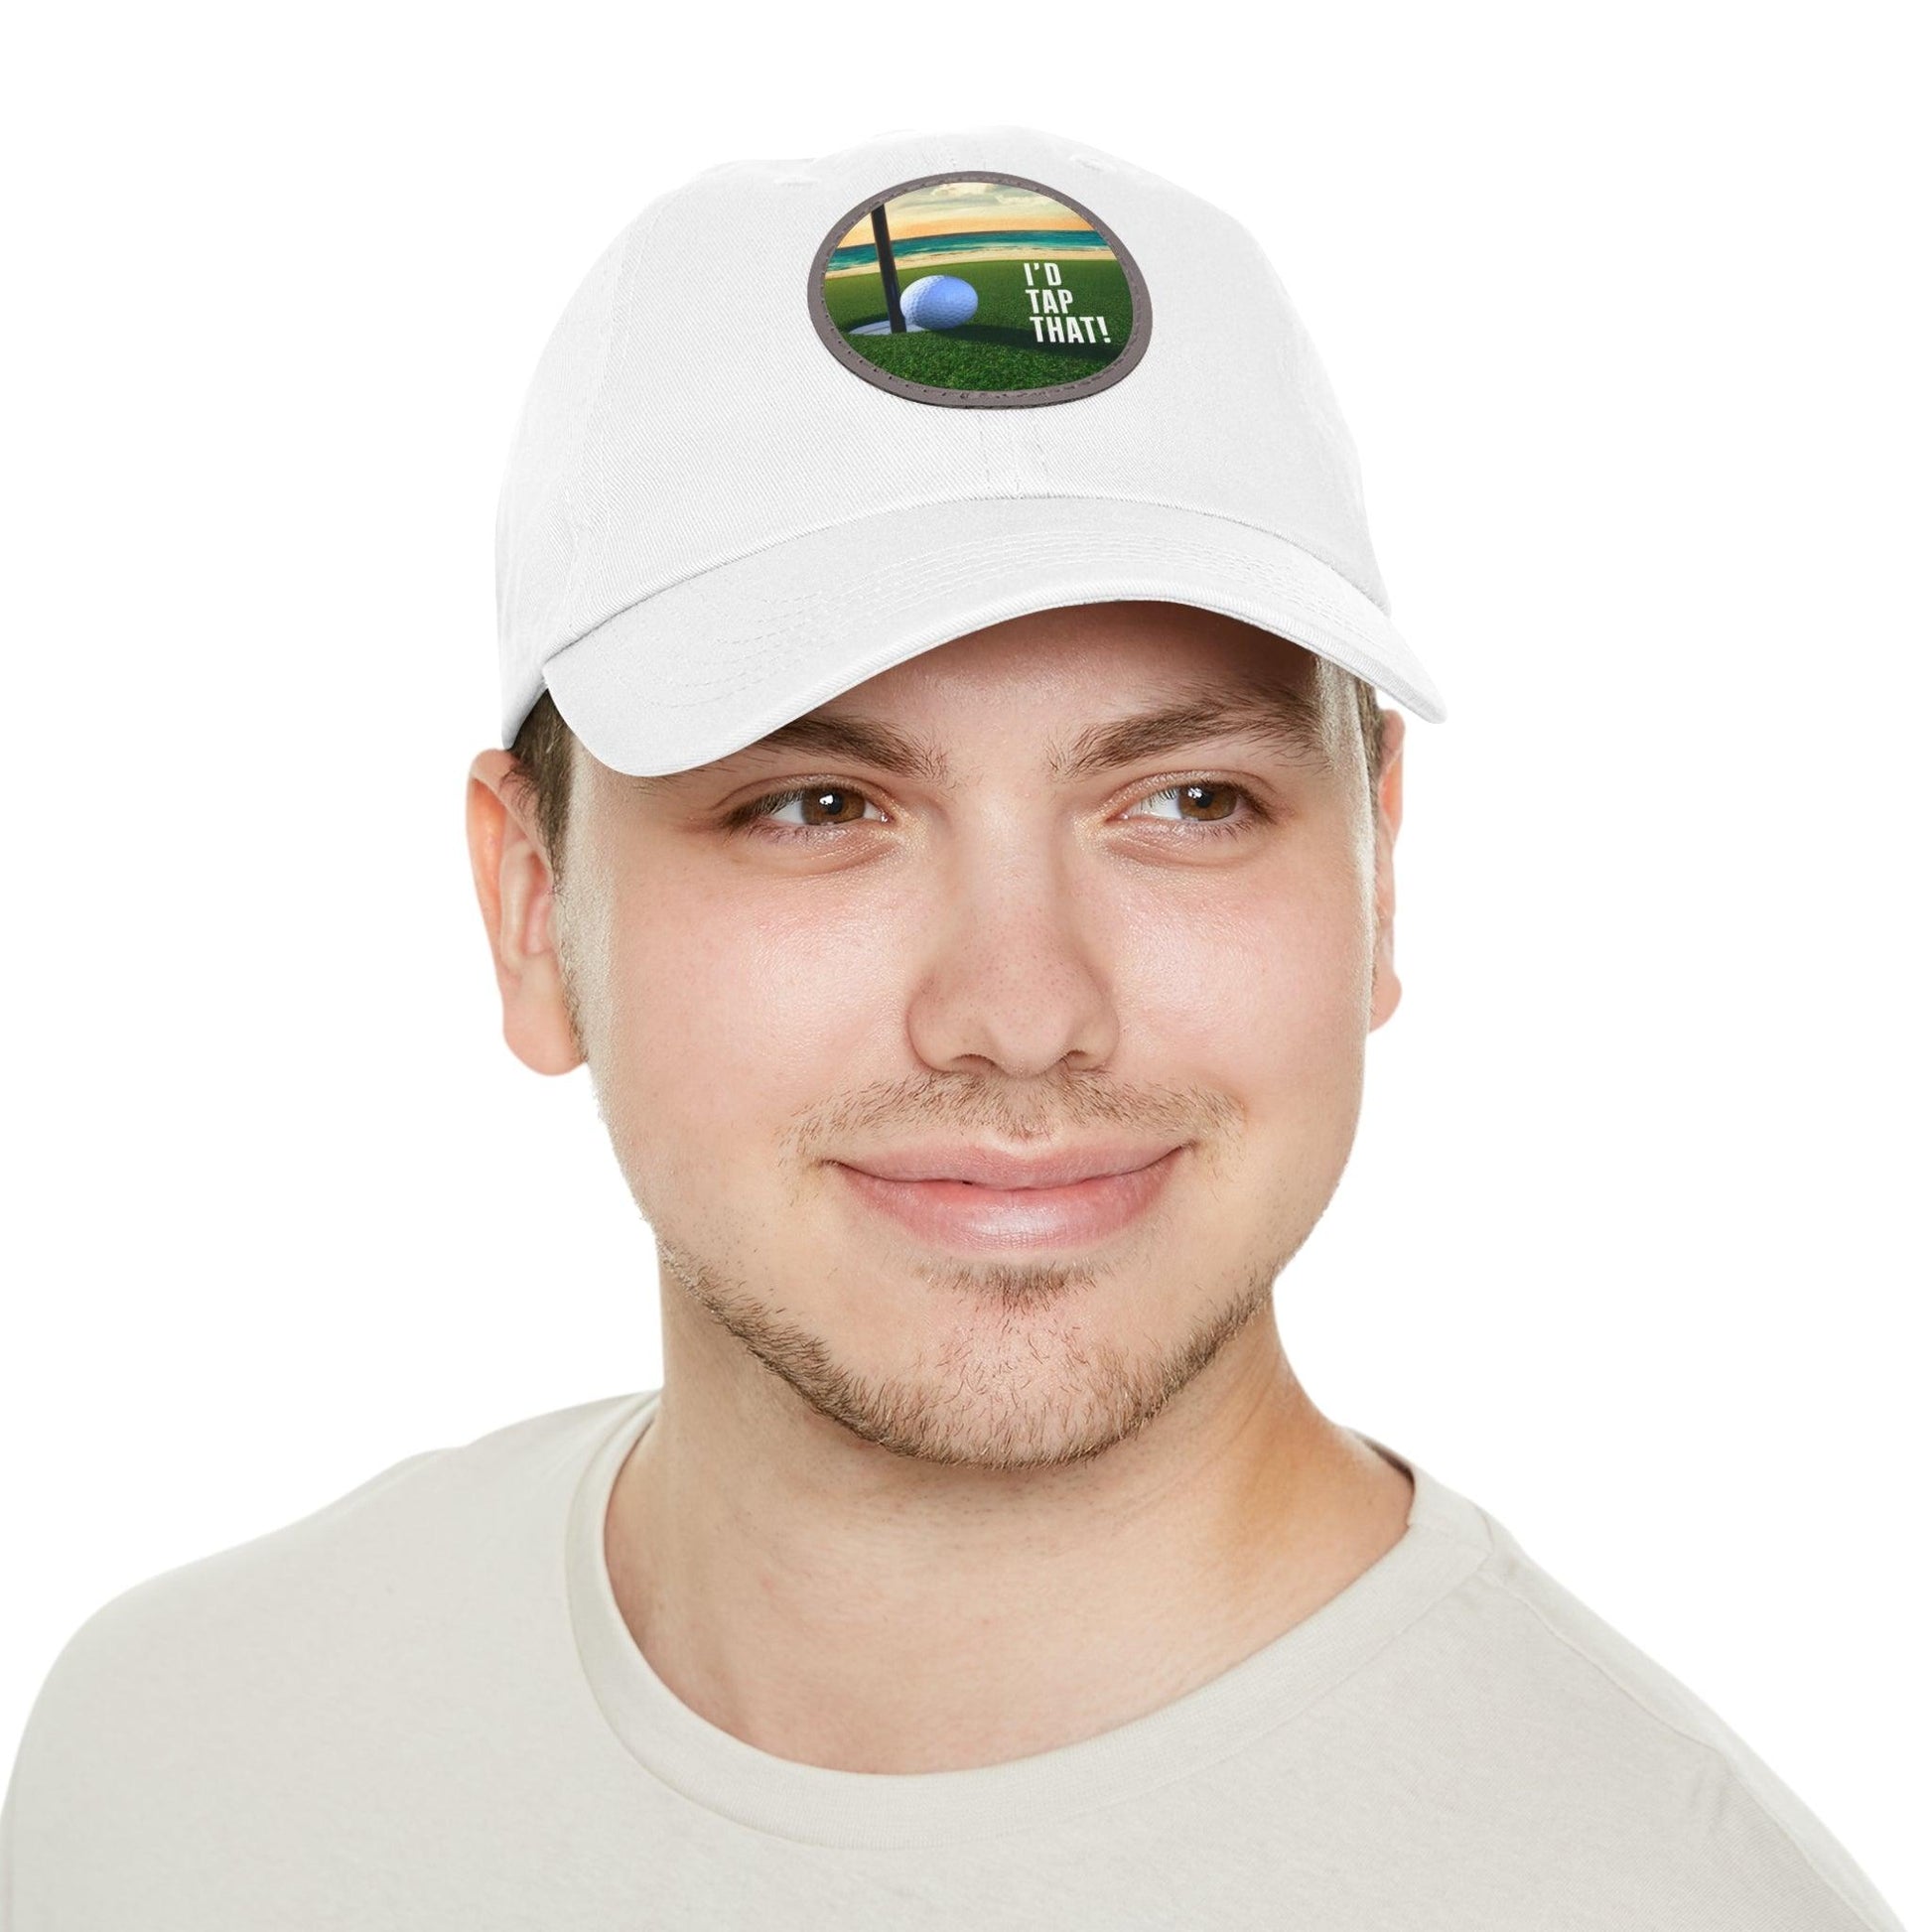 I'd Tap that Beach Side Golfing Hat, Funny Saying Beach Cap, Gulf Inspired Cap - Coastal Collections